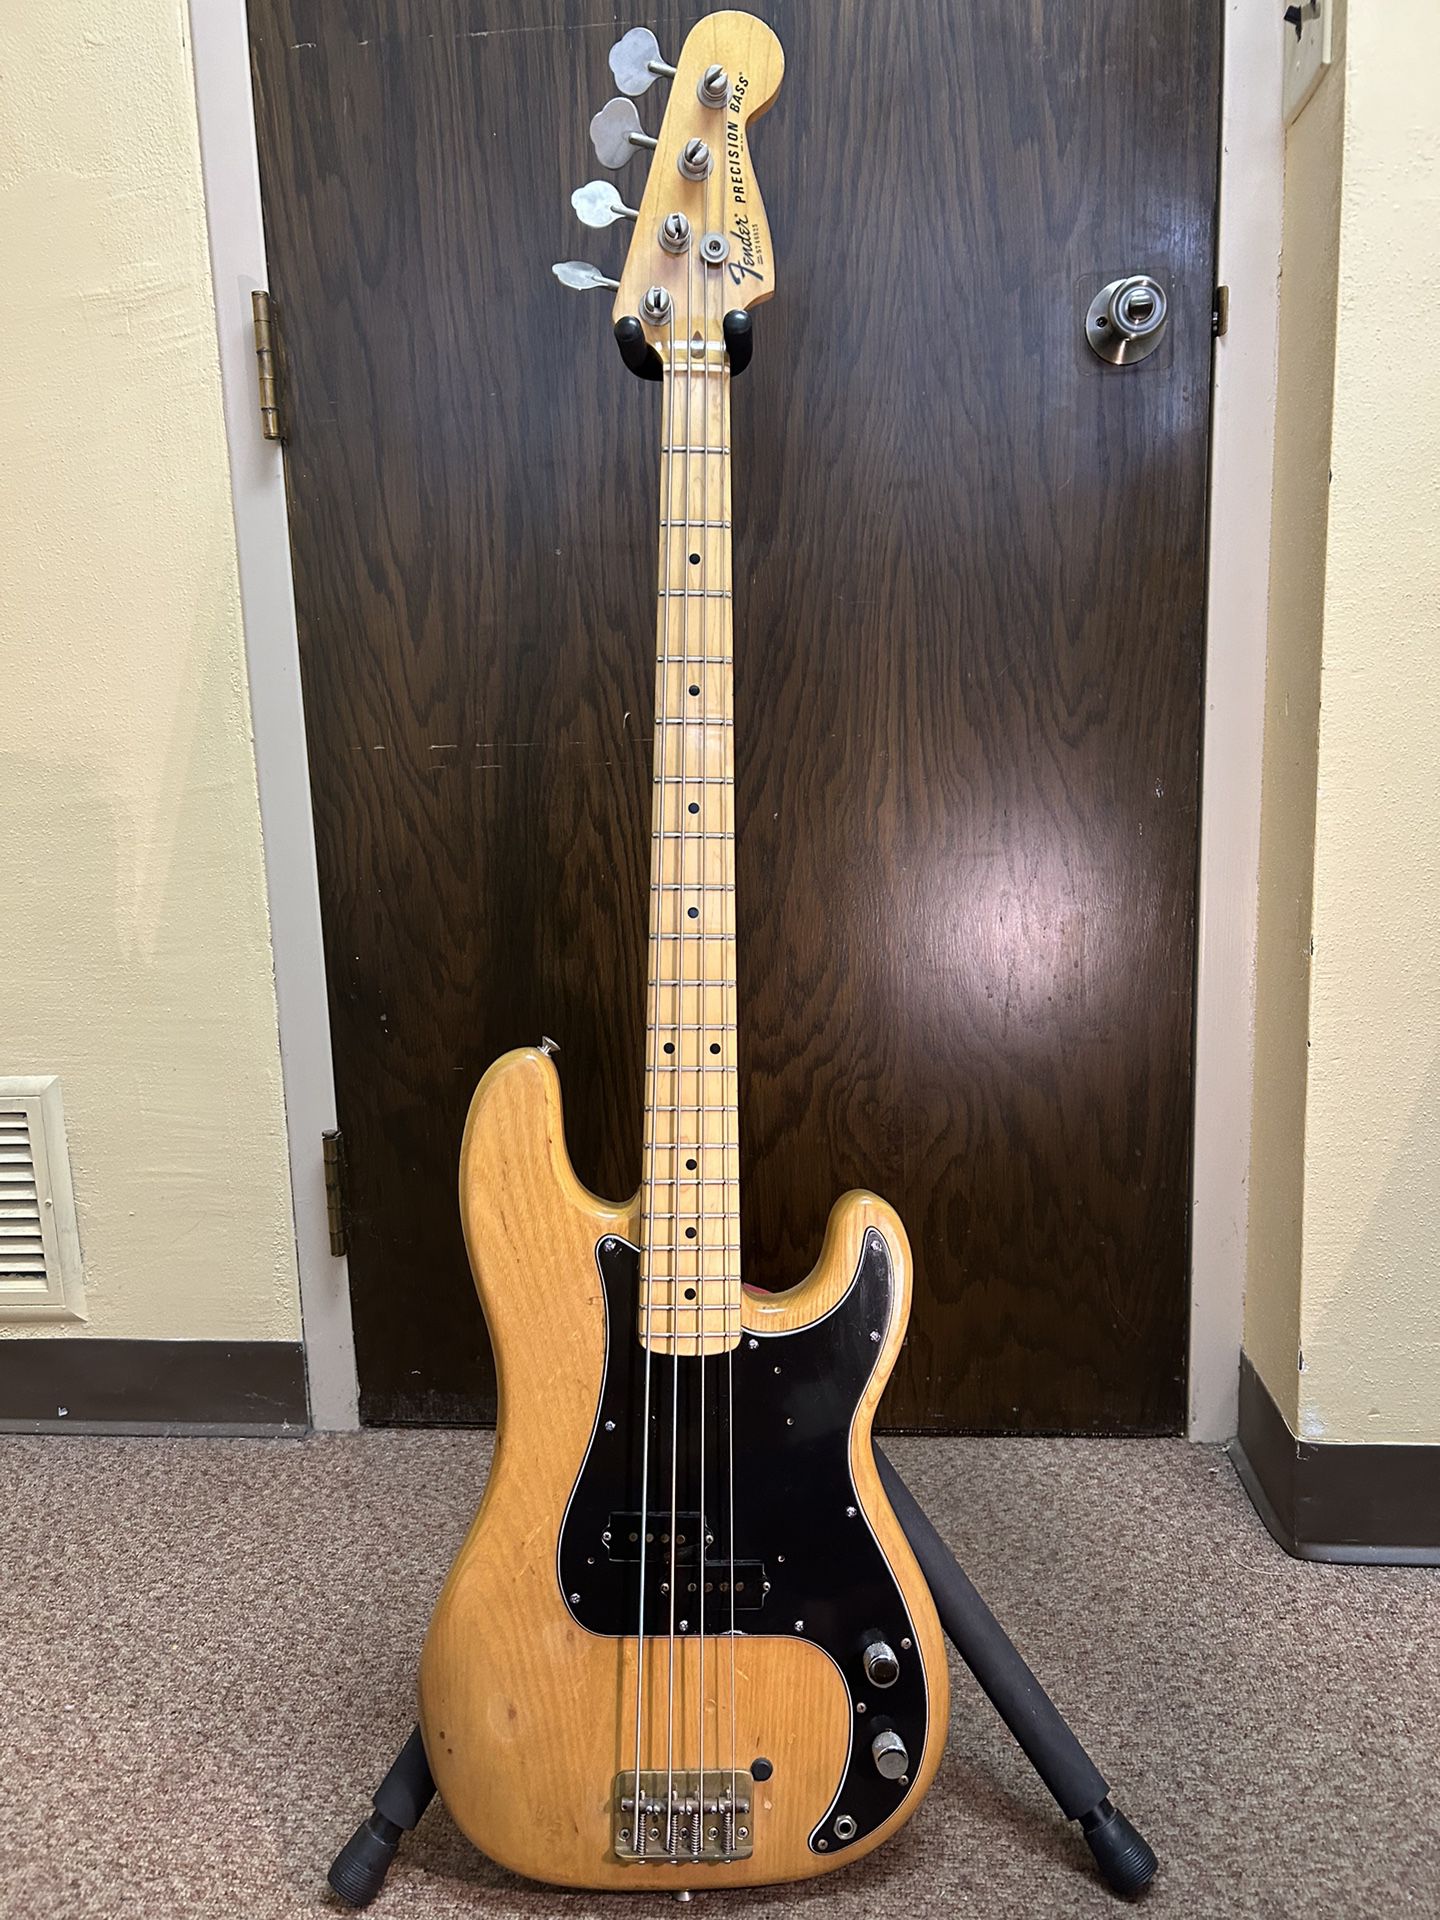 1977 Fender Precision Bass Made In The U.S.A.